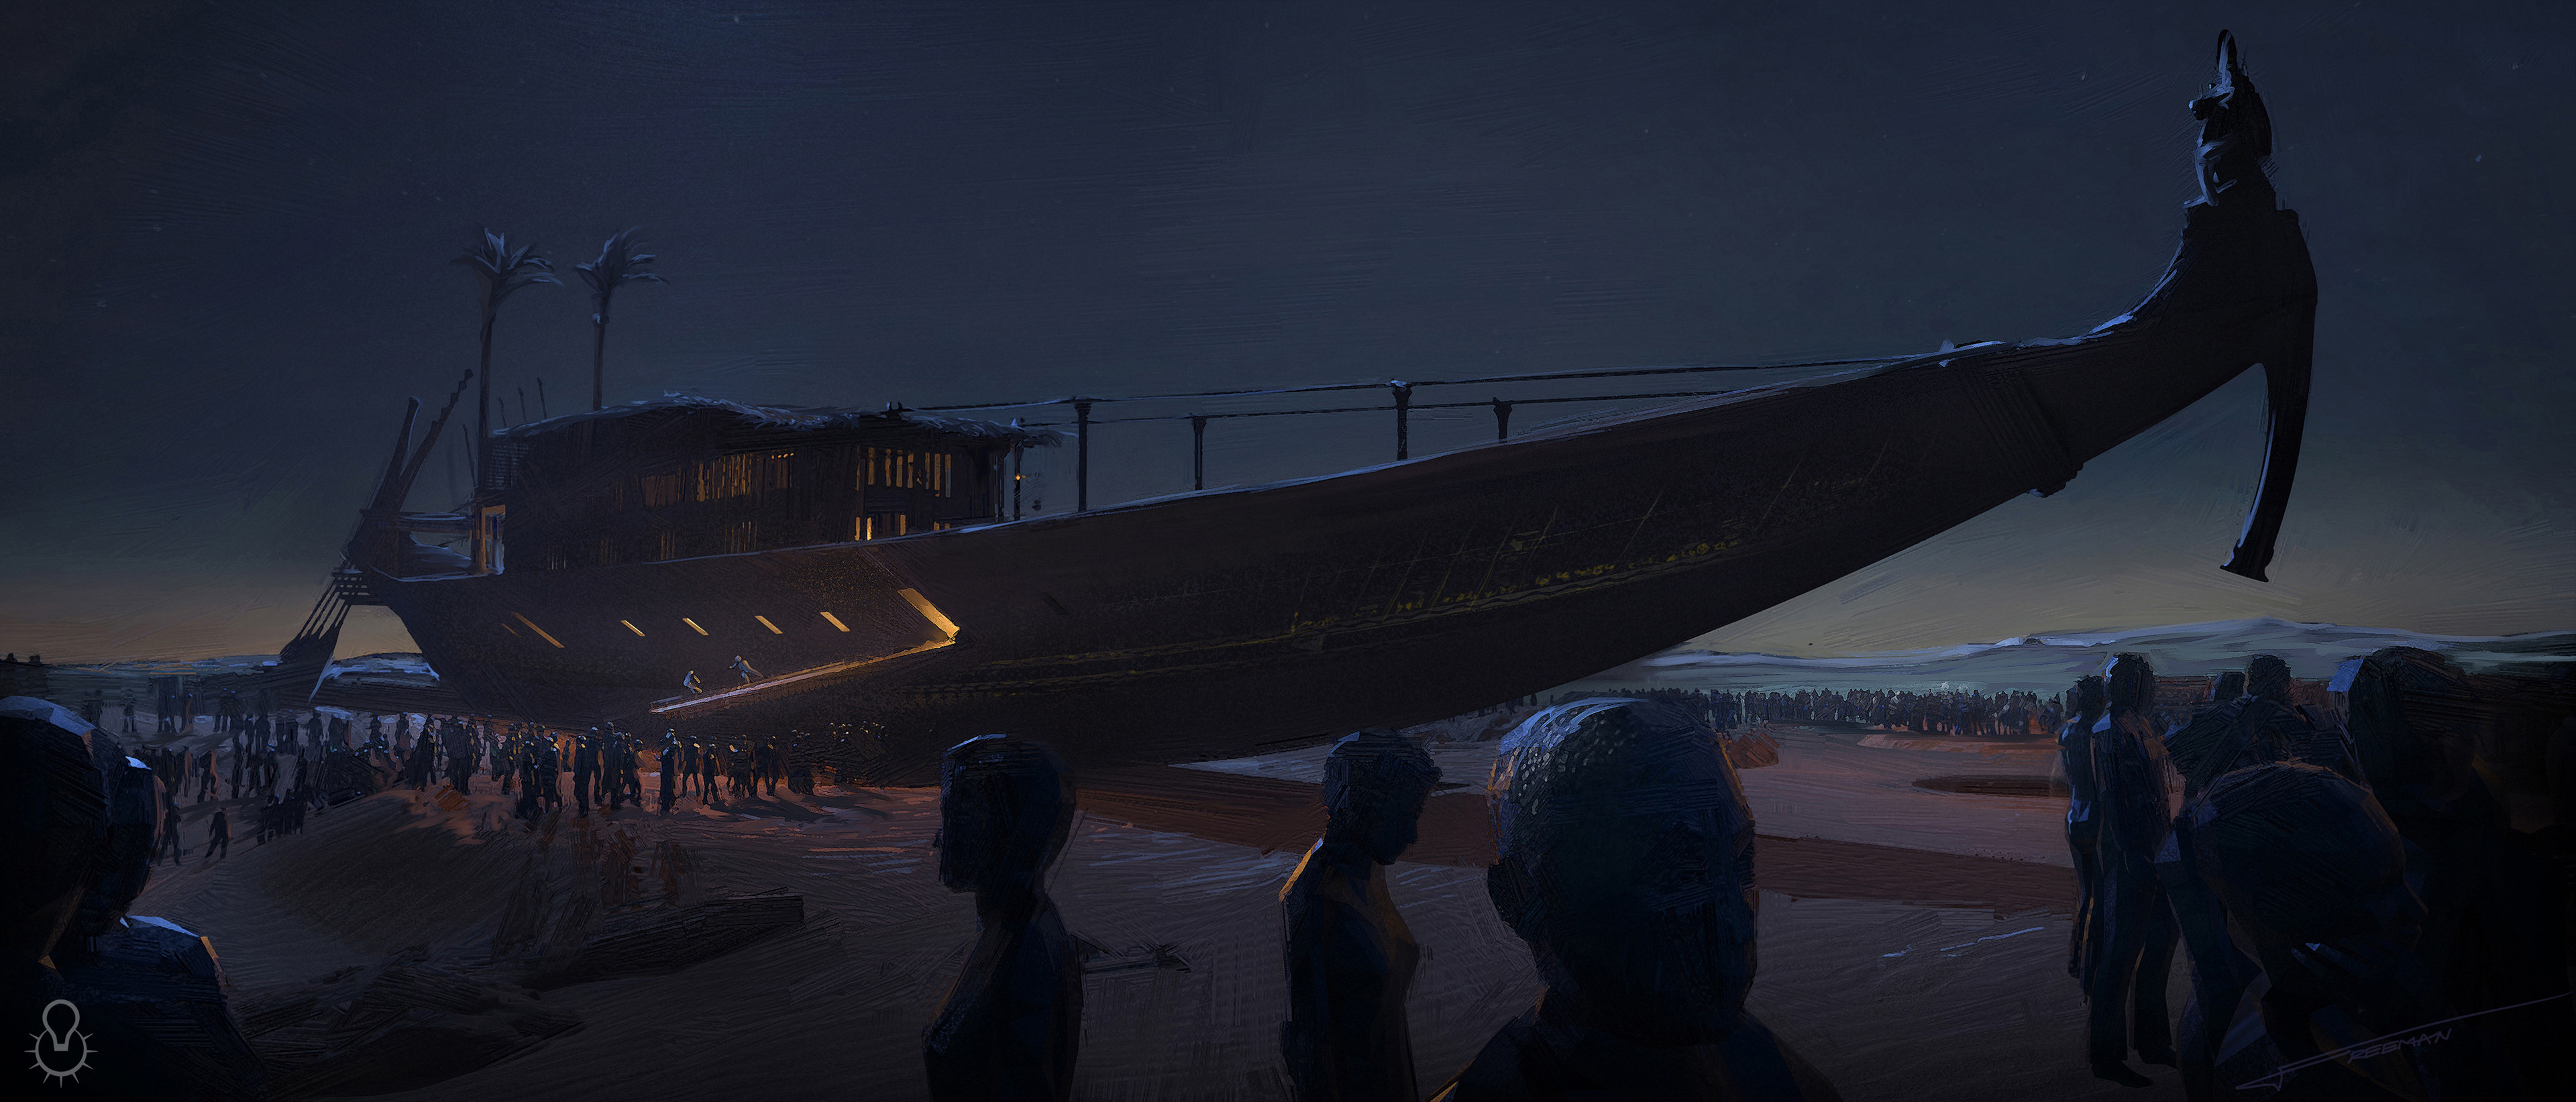 View of Tawaret's barge from the sand. I loved working on these pre-production concepts as It enabled me to work in a more painterly,  expressive way, focusing on mood, lighting and colour.